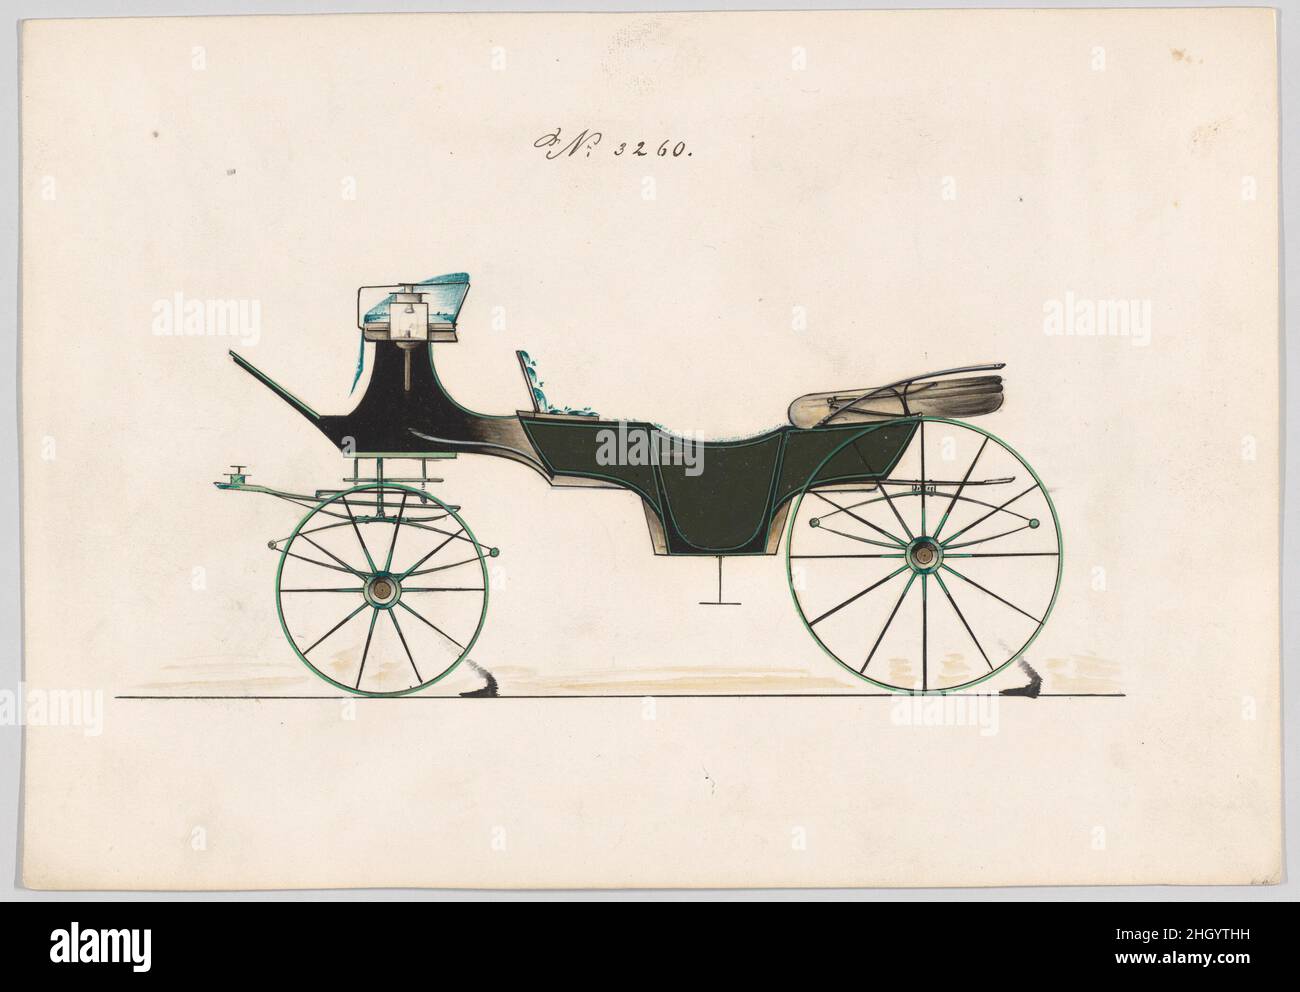 Design for Vis-à-vis, no. 3260 1876 Brewster & Co. American Brewster & Company HistoryEstablished in 1810 by James Brewster (1788–1866) in New Haven, Connecticut, Brewster & Company, specialized in the manufacture of fine carriages. The founder opened a New York showroom in 1827 at 53-54 Broad Street, and the company flourished under generations of family leadership. Expansion necessitated moves around lower Manhattan, with name changes reflecting shifts of management–James Brewster & Sons operated at 25 Canal Street, James Brewster Sons at 396 Broadway, and Brewster of Broome Street was based Stock Photo